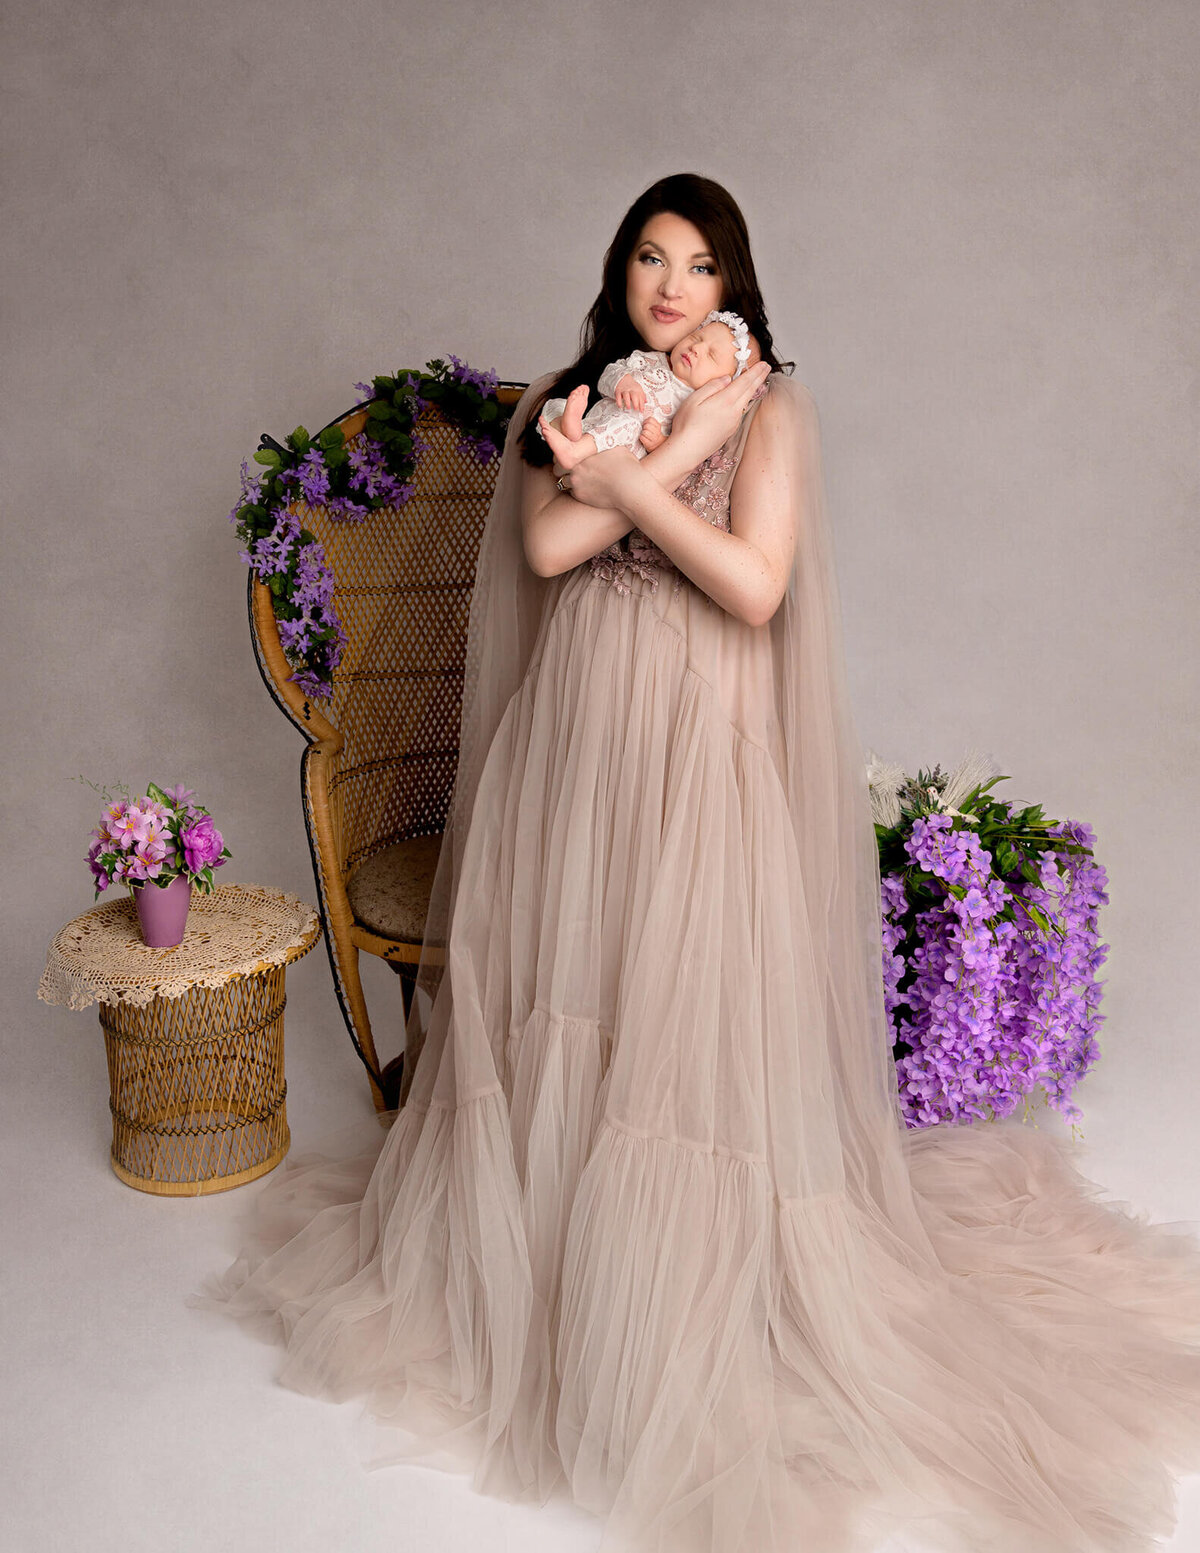 Gorgeous mom in a luxury gown holding her baby girl in her arms with boho theme and purple flowers at her photo shoot.